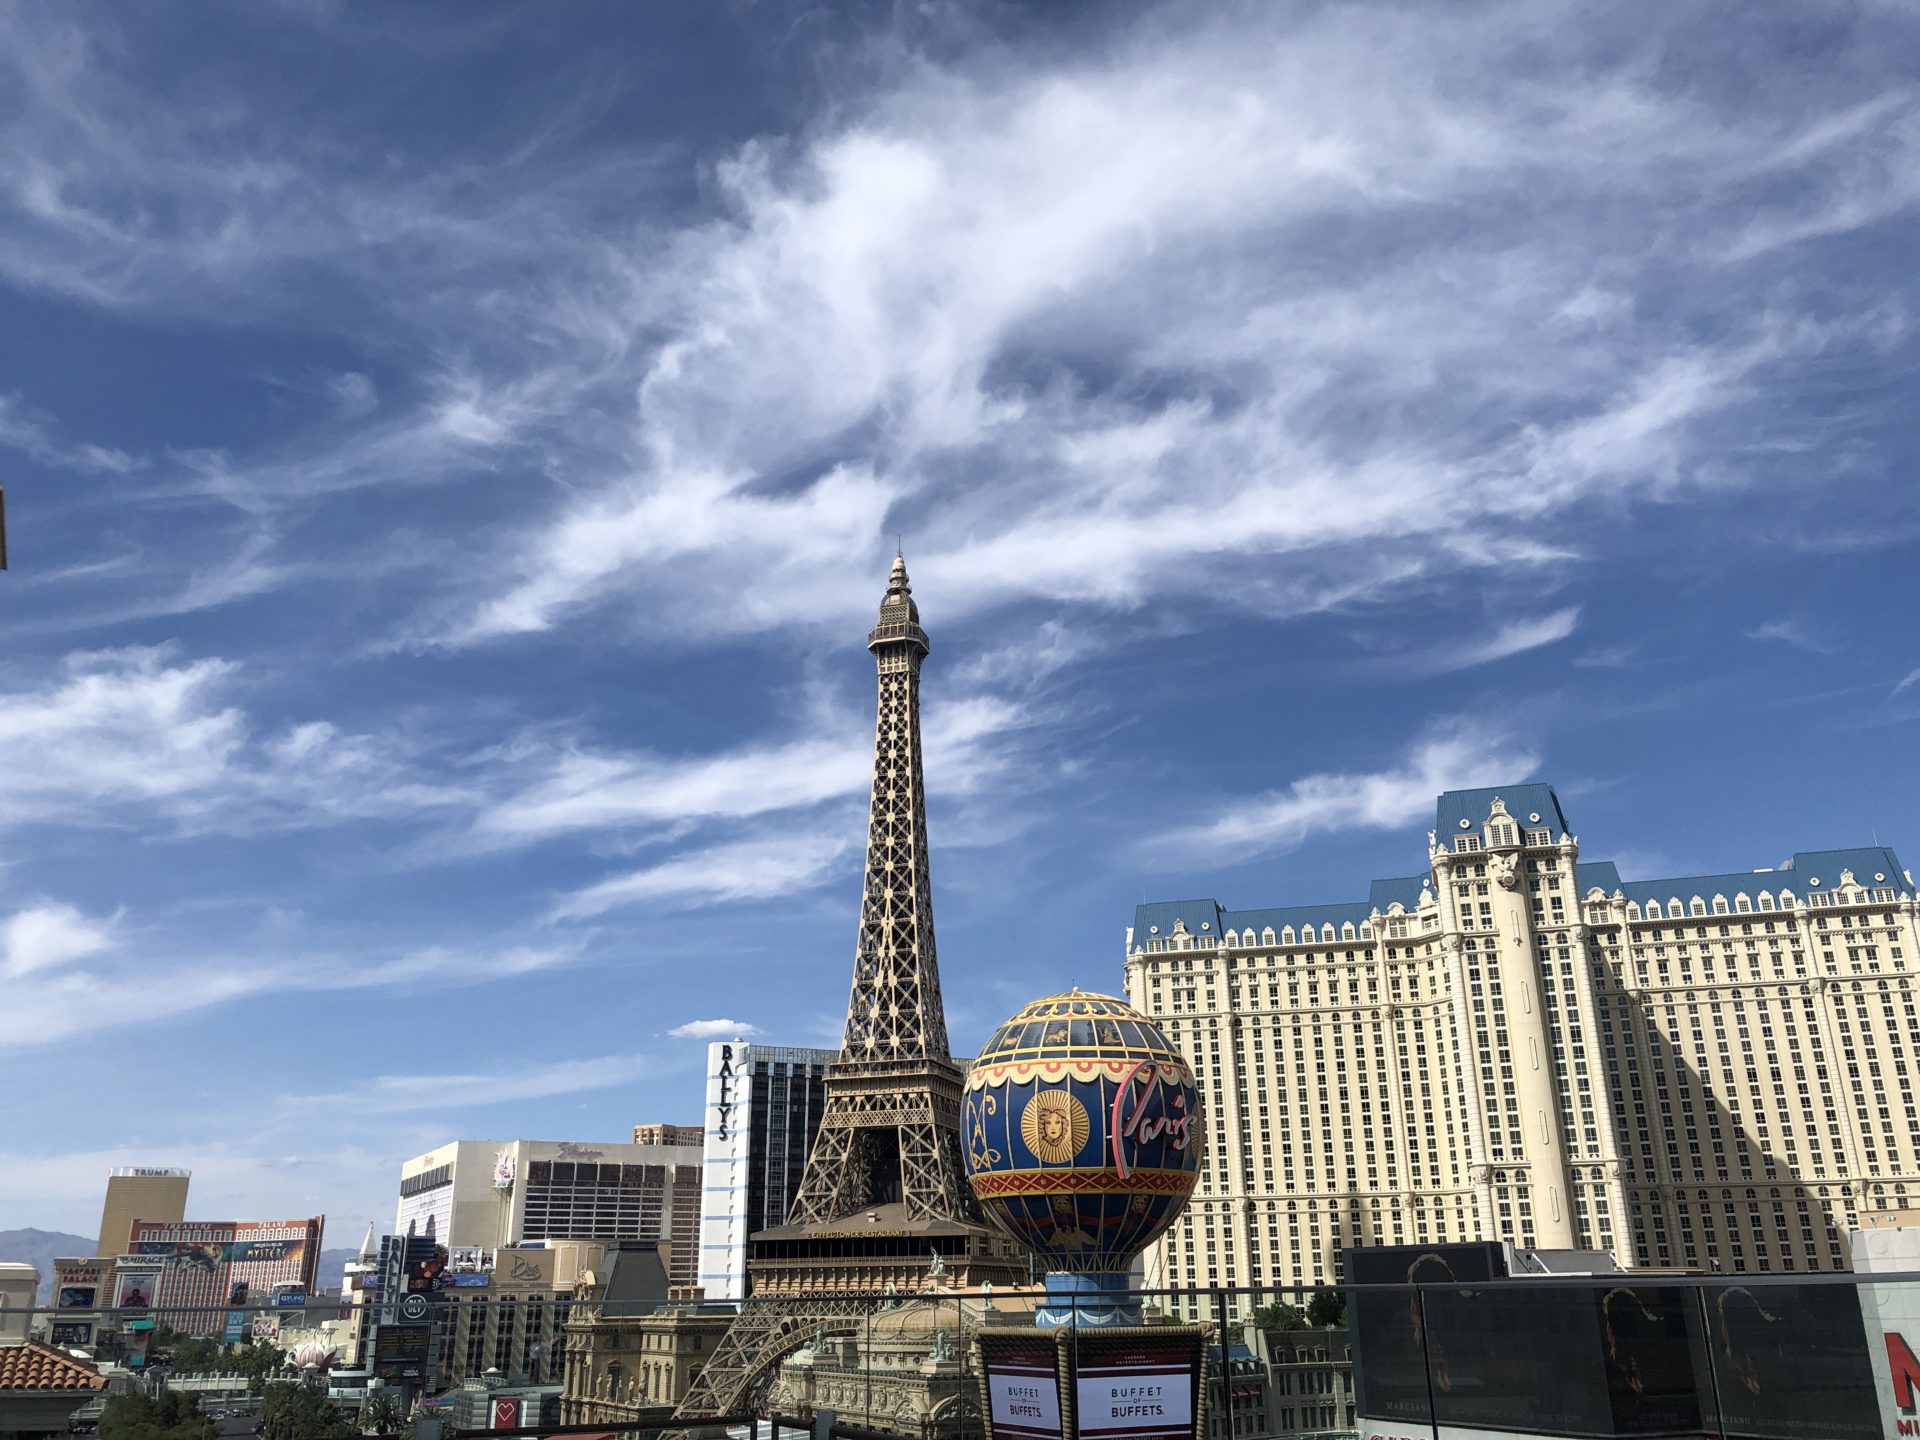 The Las Vegas Eiffel Tower stands as a replica of its original french counterpart, featuring intricate ironwork illuminated by vibrant lights, offering a stunning and iconic landmark on the glittering Strip.